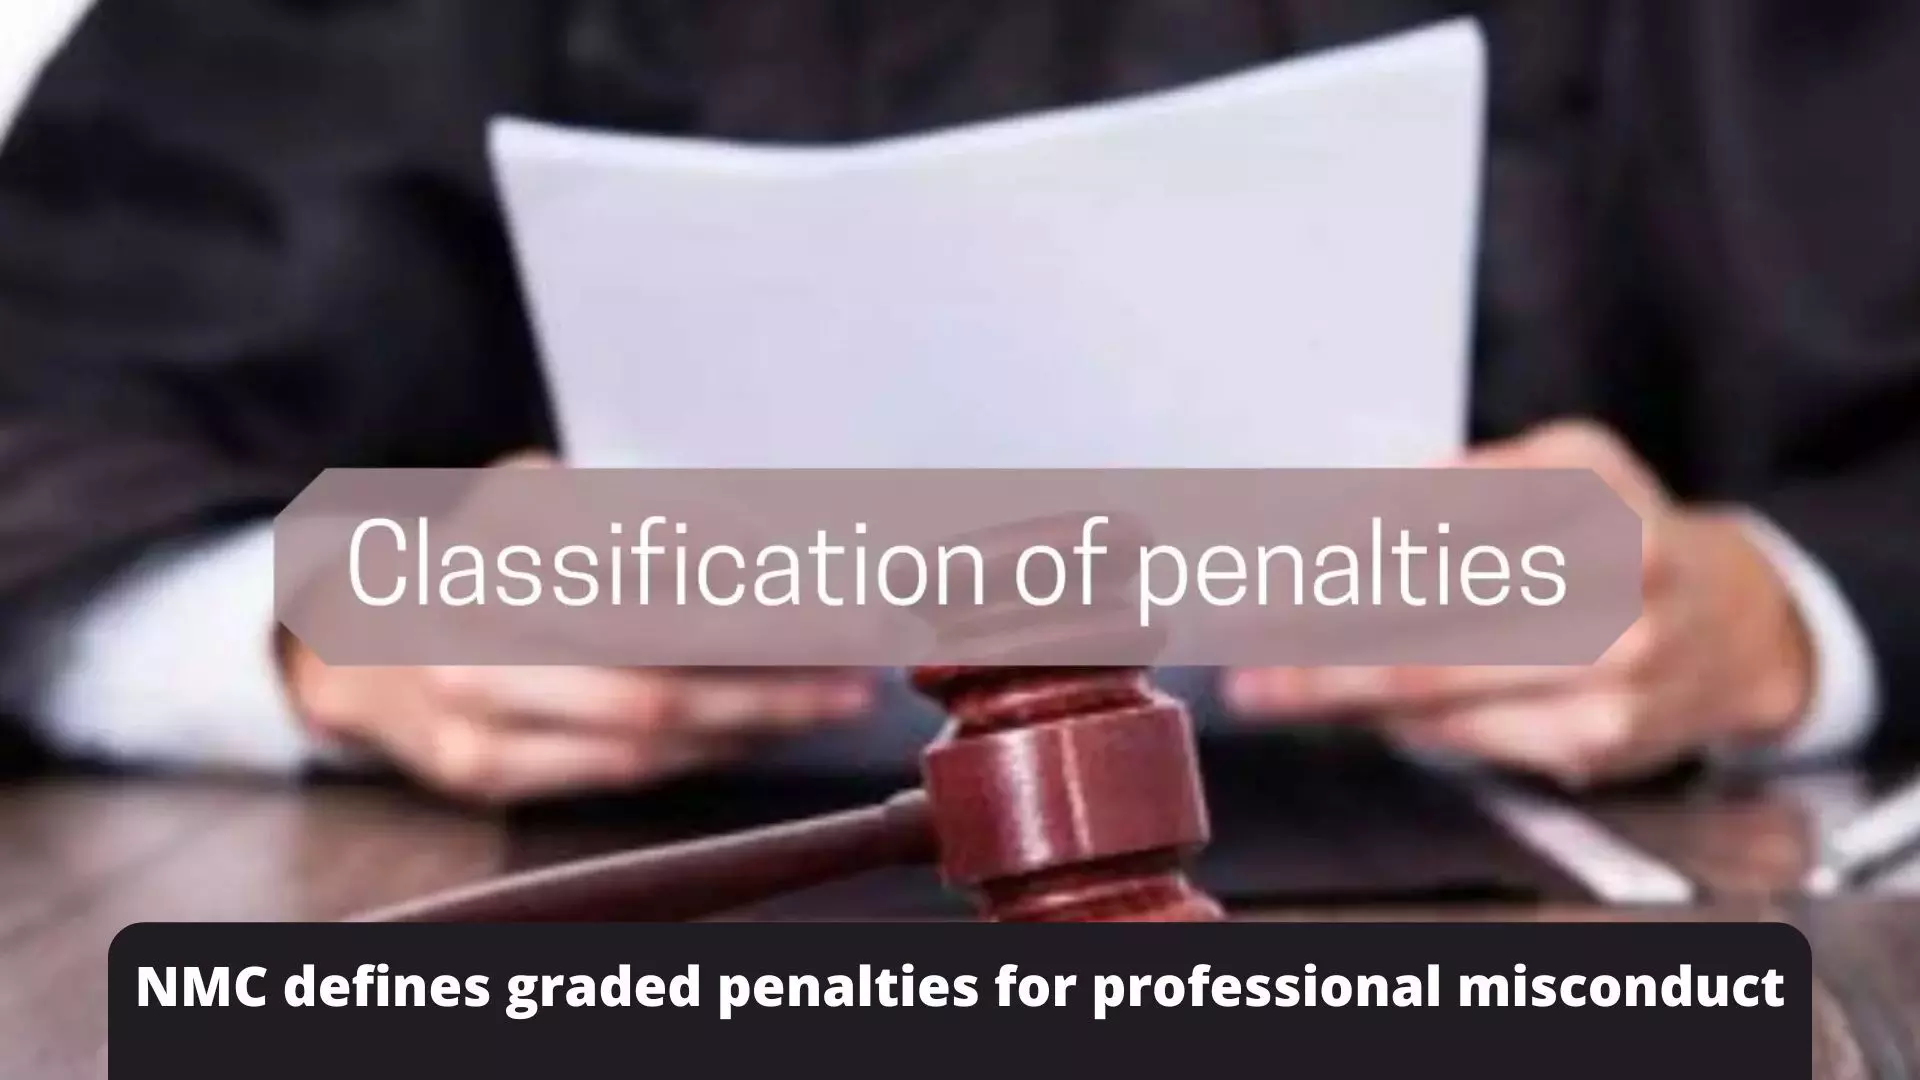 NMC defines graded penalties for professional misconduct